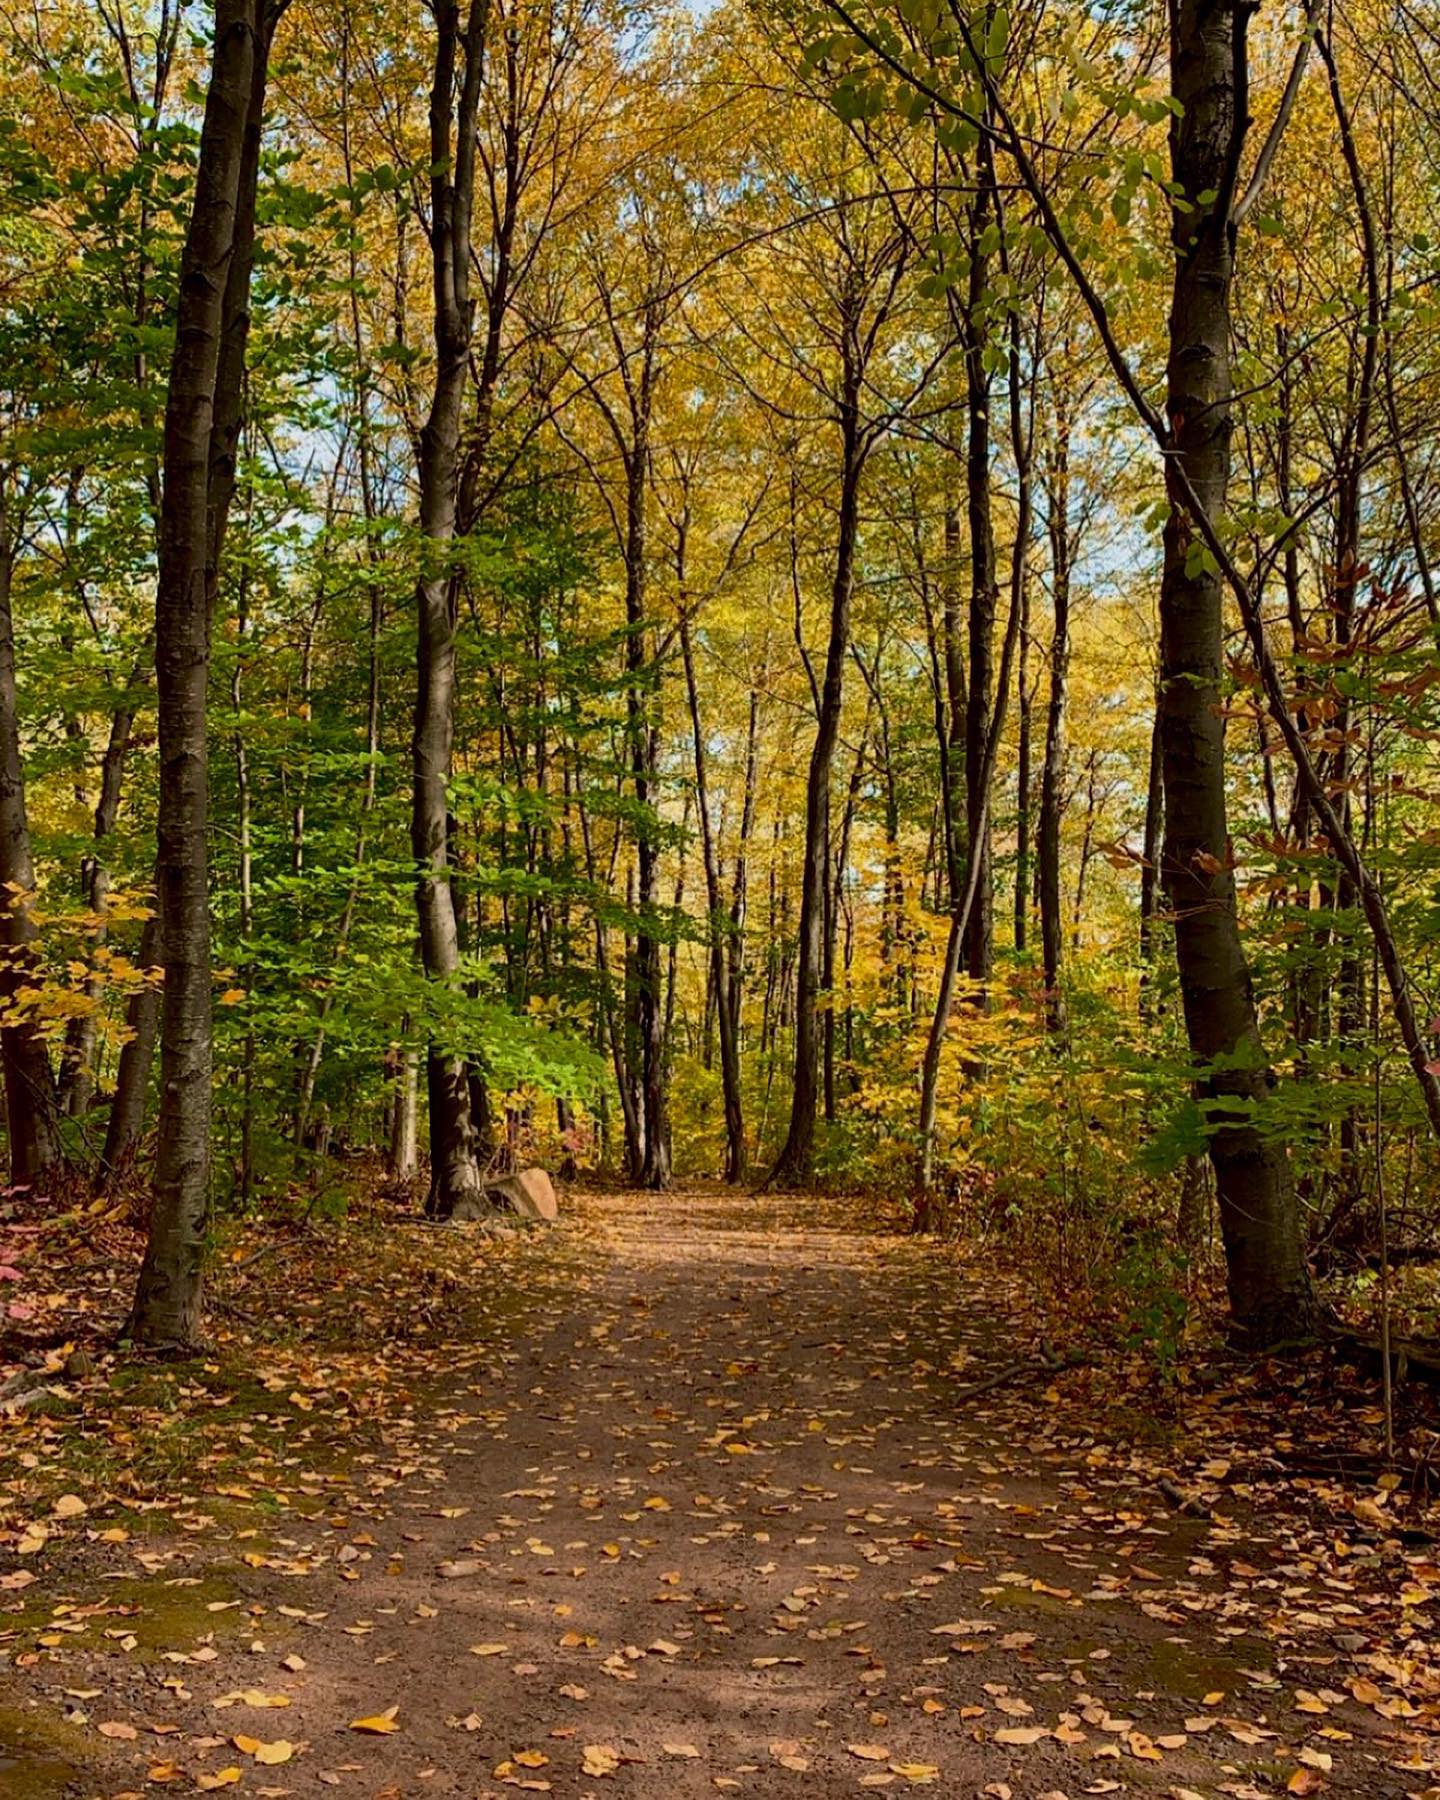 View of an outdoor walkway in the fall.